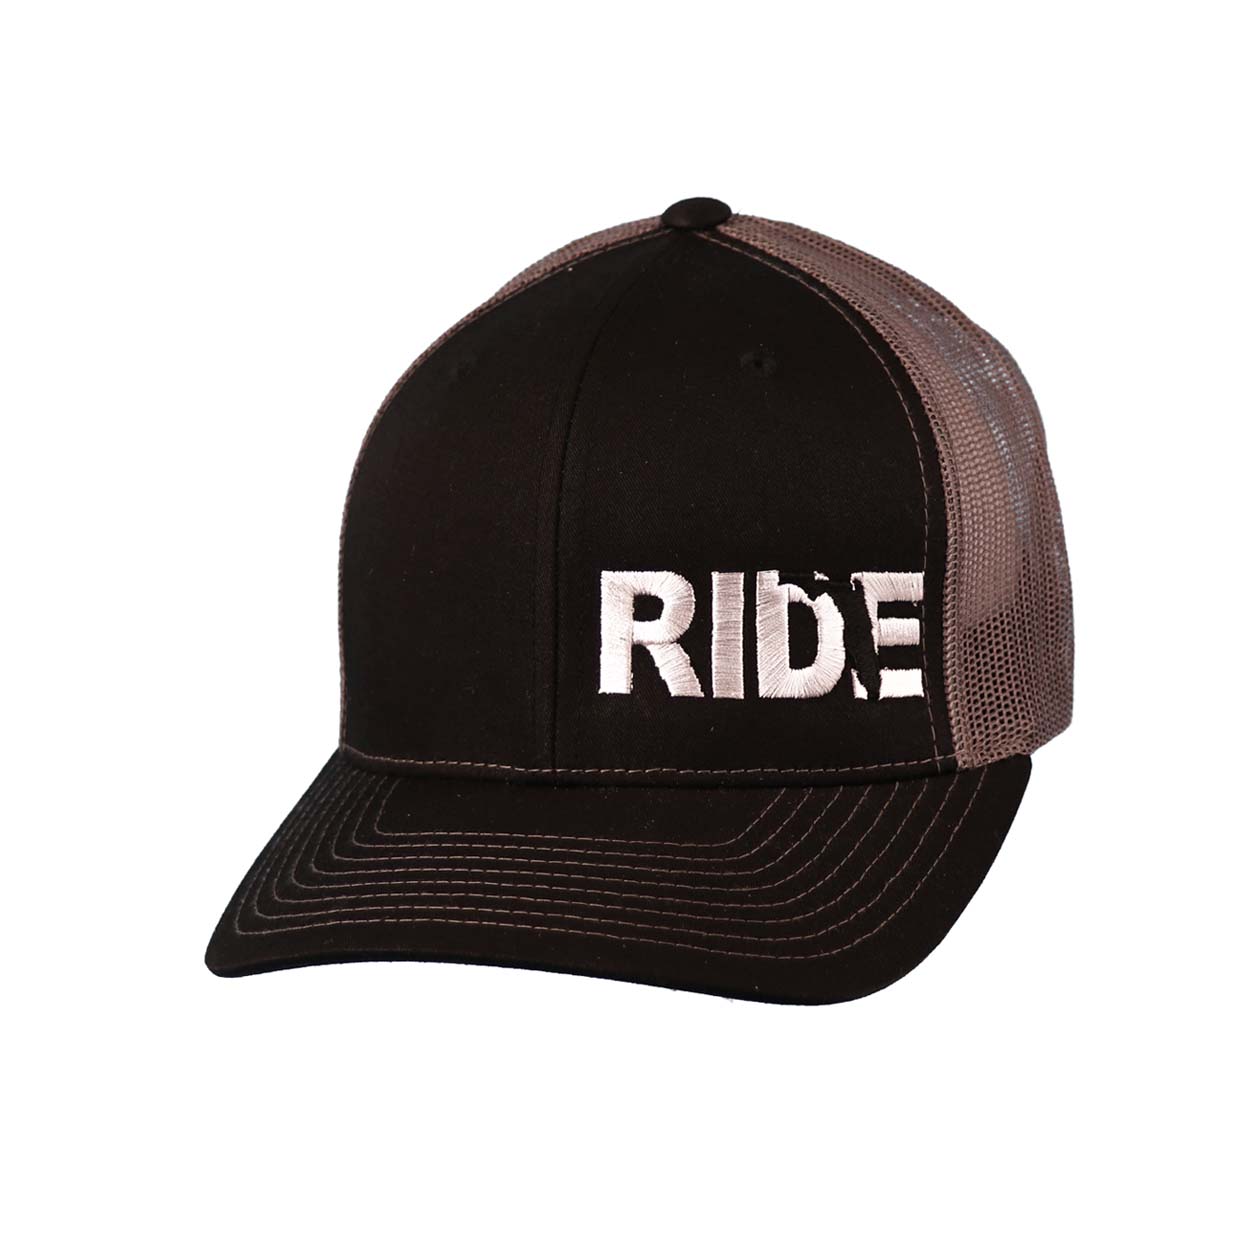 Ride Florida Night Out Embroidered Snapback Trucker Hat Black/Gray